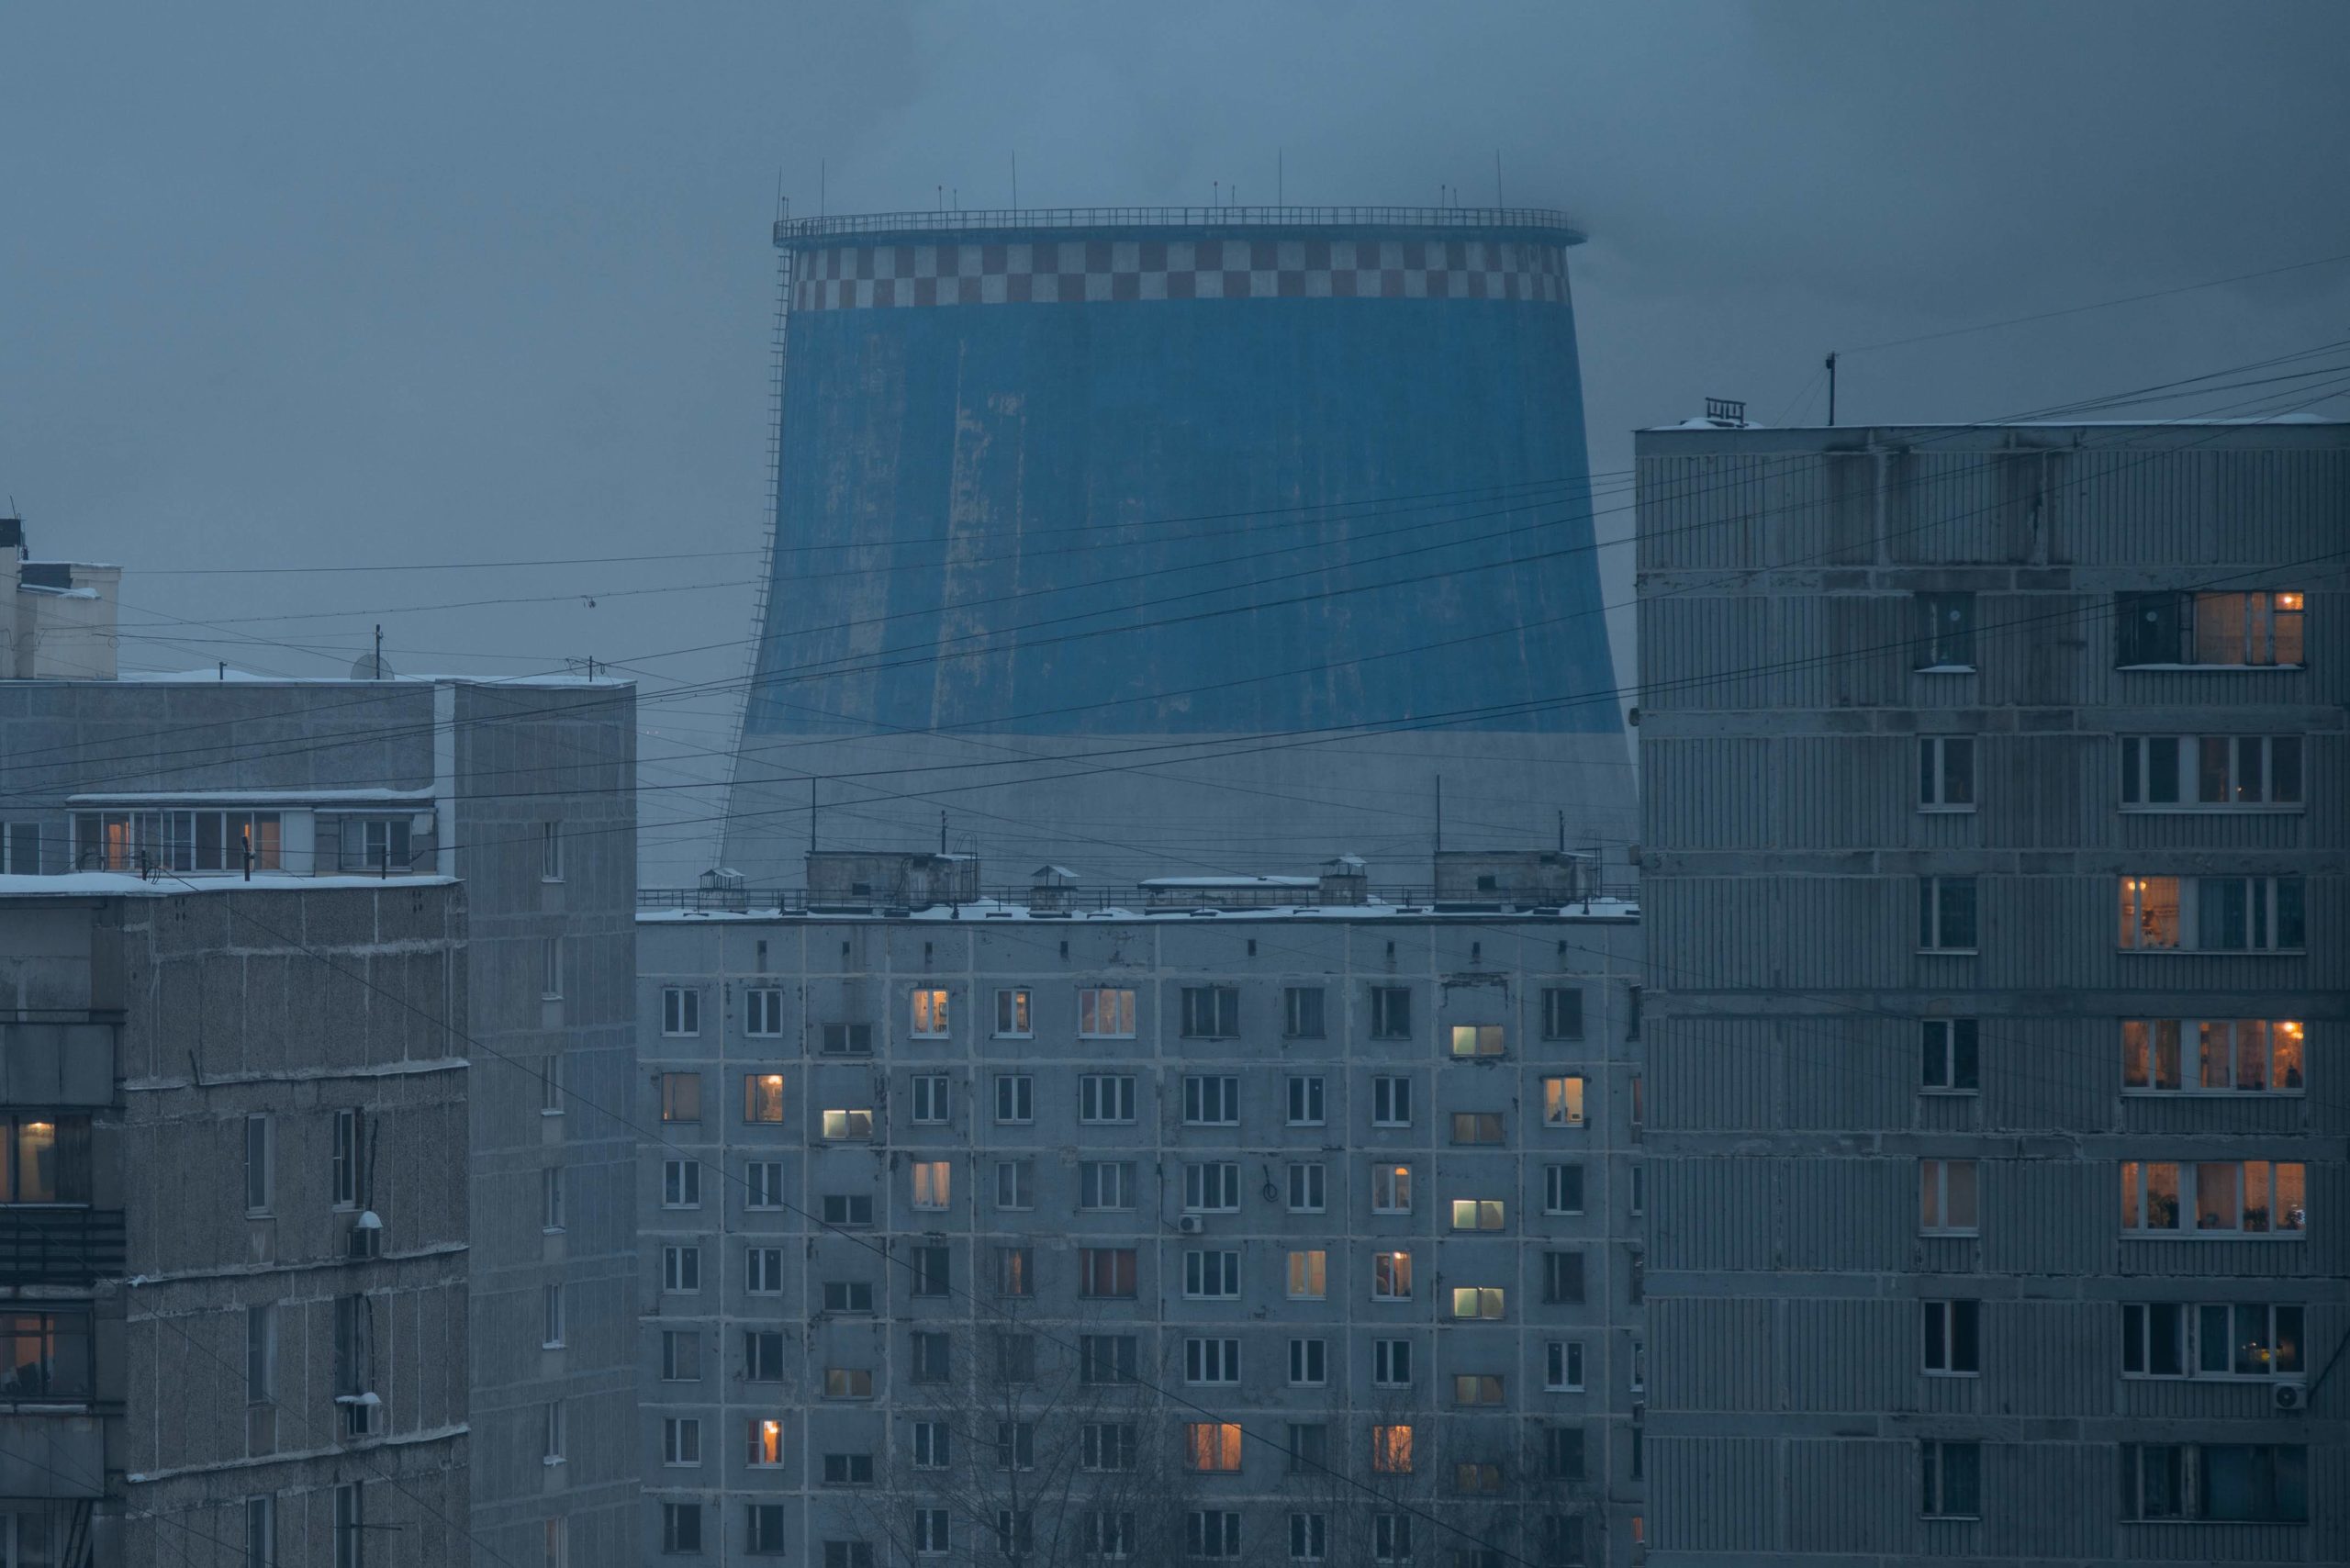 cooling tower of power plant looming over residential buildings